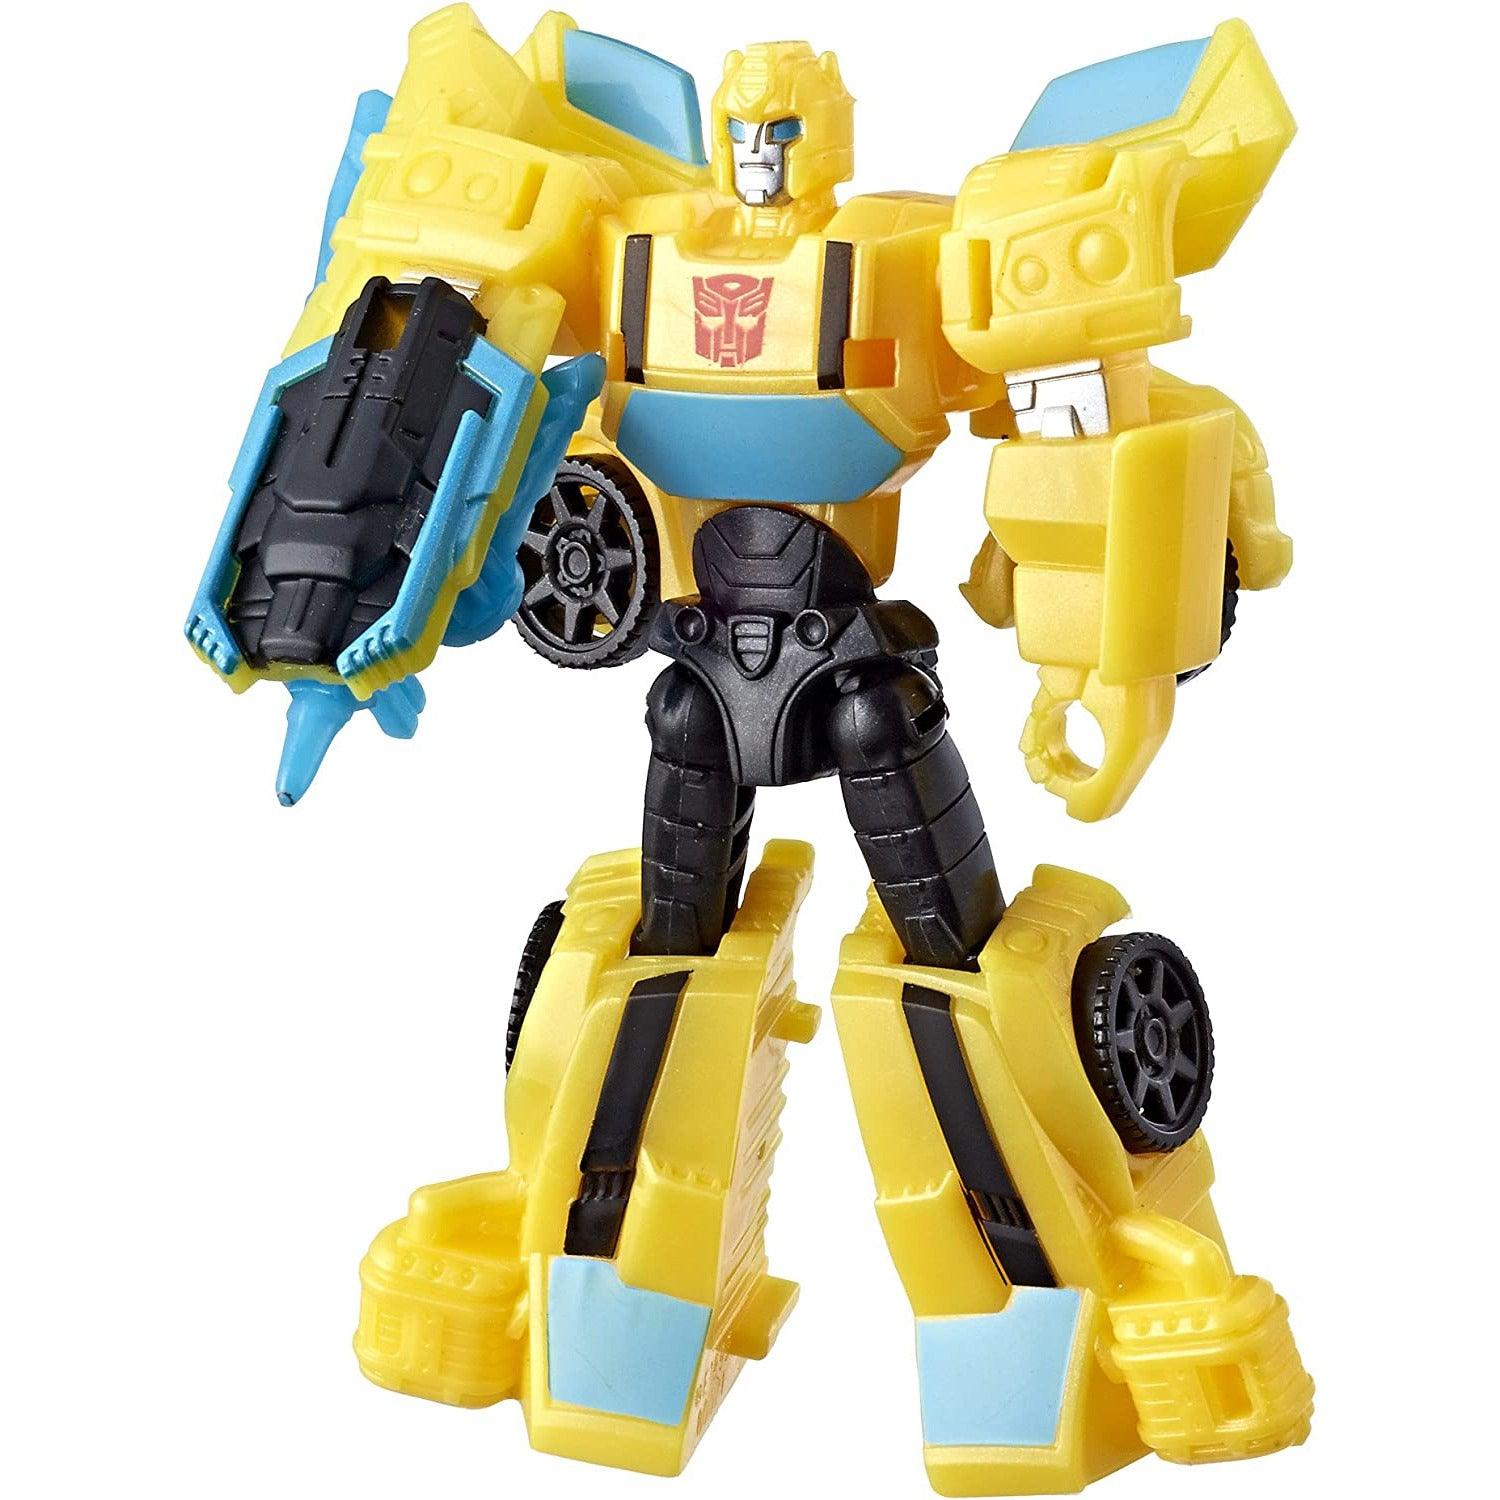 Transformers Bumblebee Cyberverse Adventures Action Attackers Warrior Class Bumblebee Sting Shot Move 5.4 Inch - BumbleToys - 8+ Years, Boys, Eagle Plus, Figures, Pre-Order, Transformers